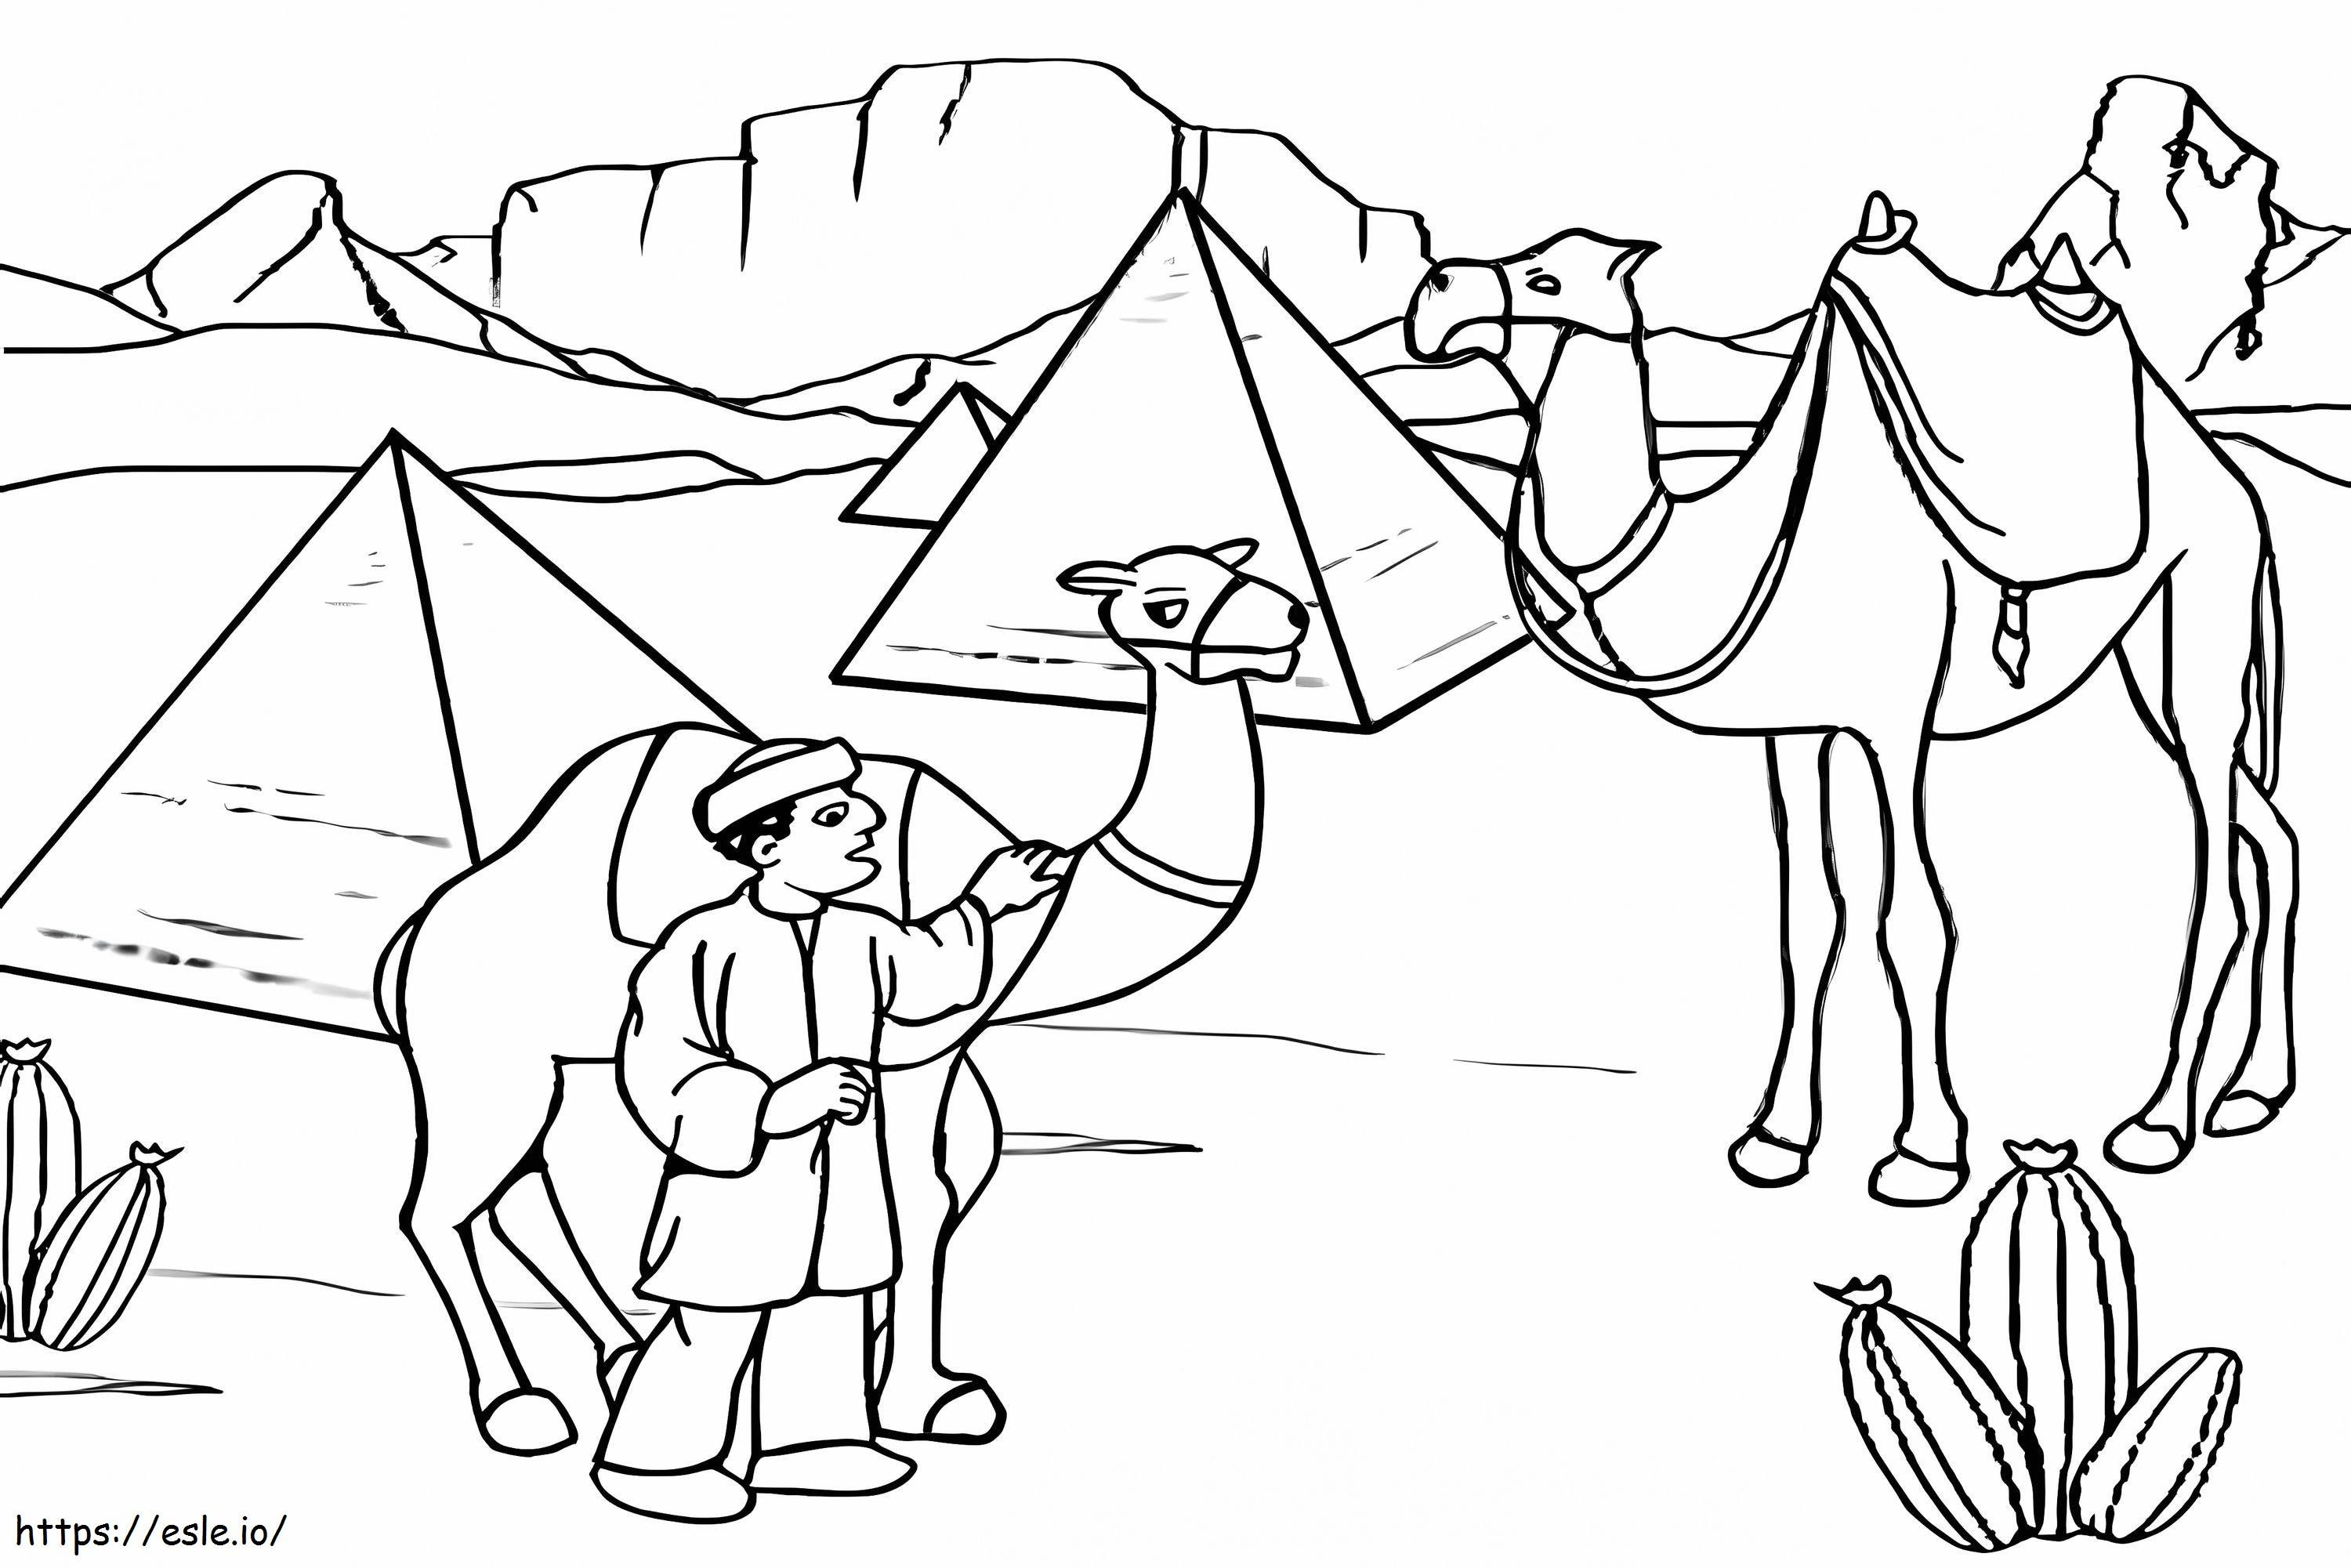 Pyramid In The Desert coloring page